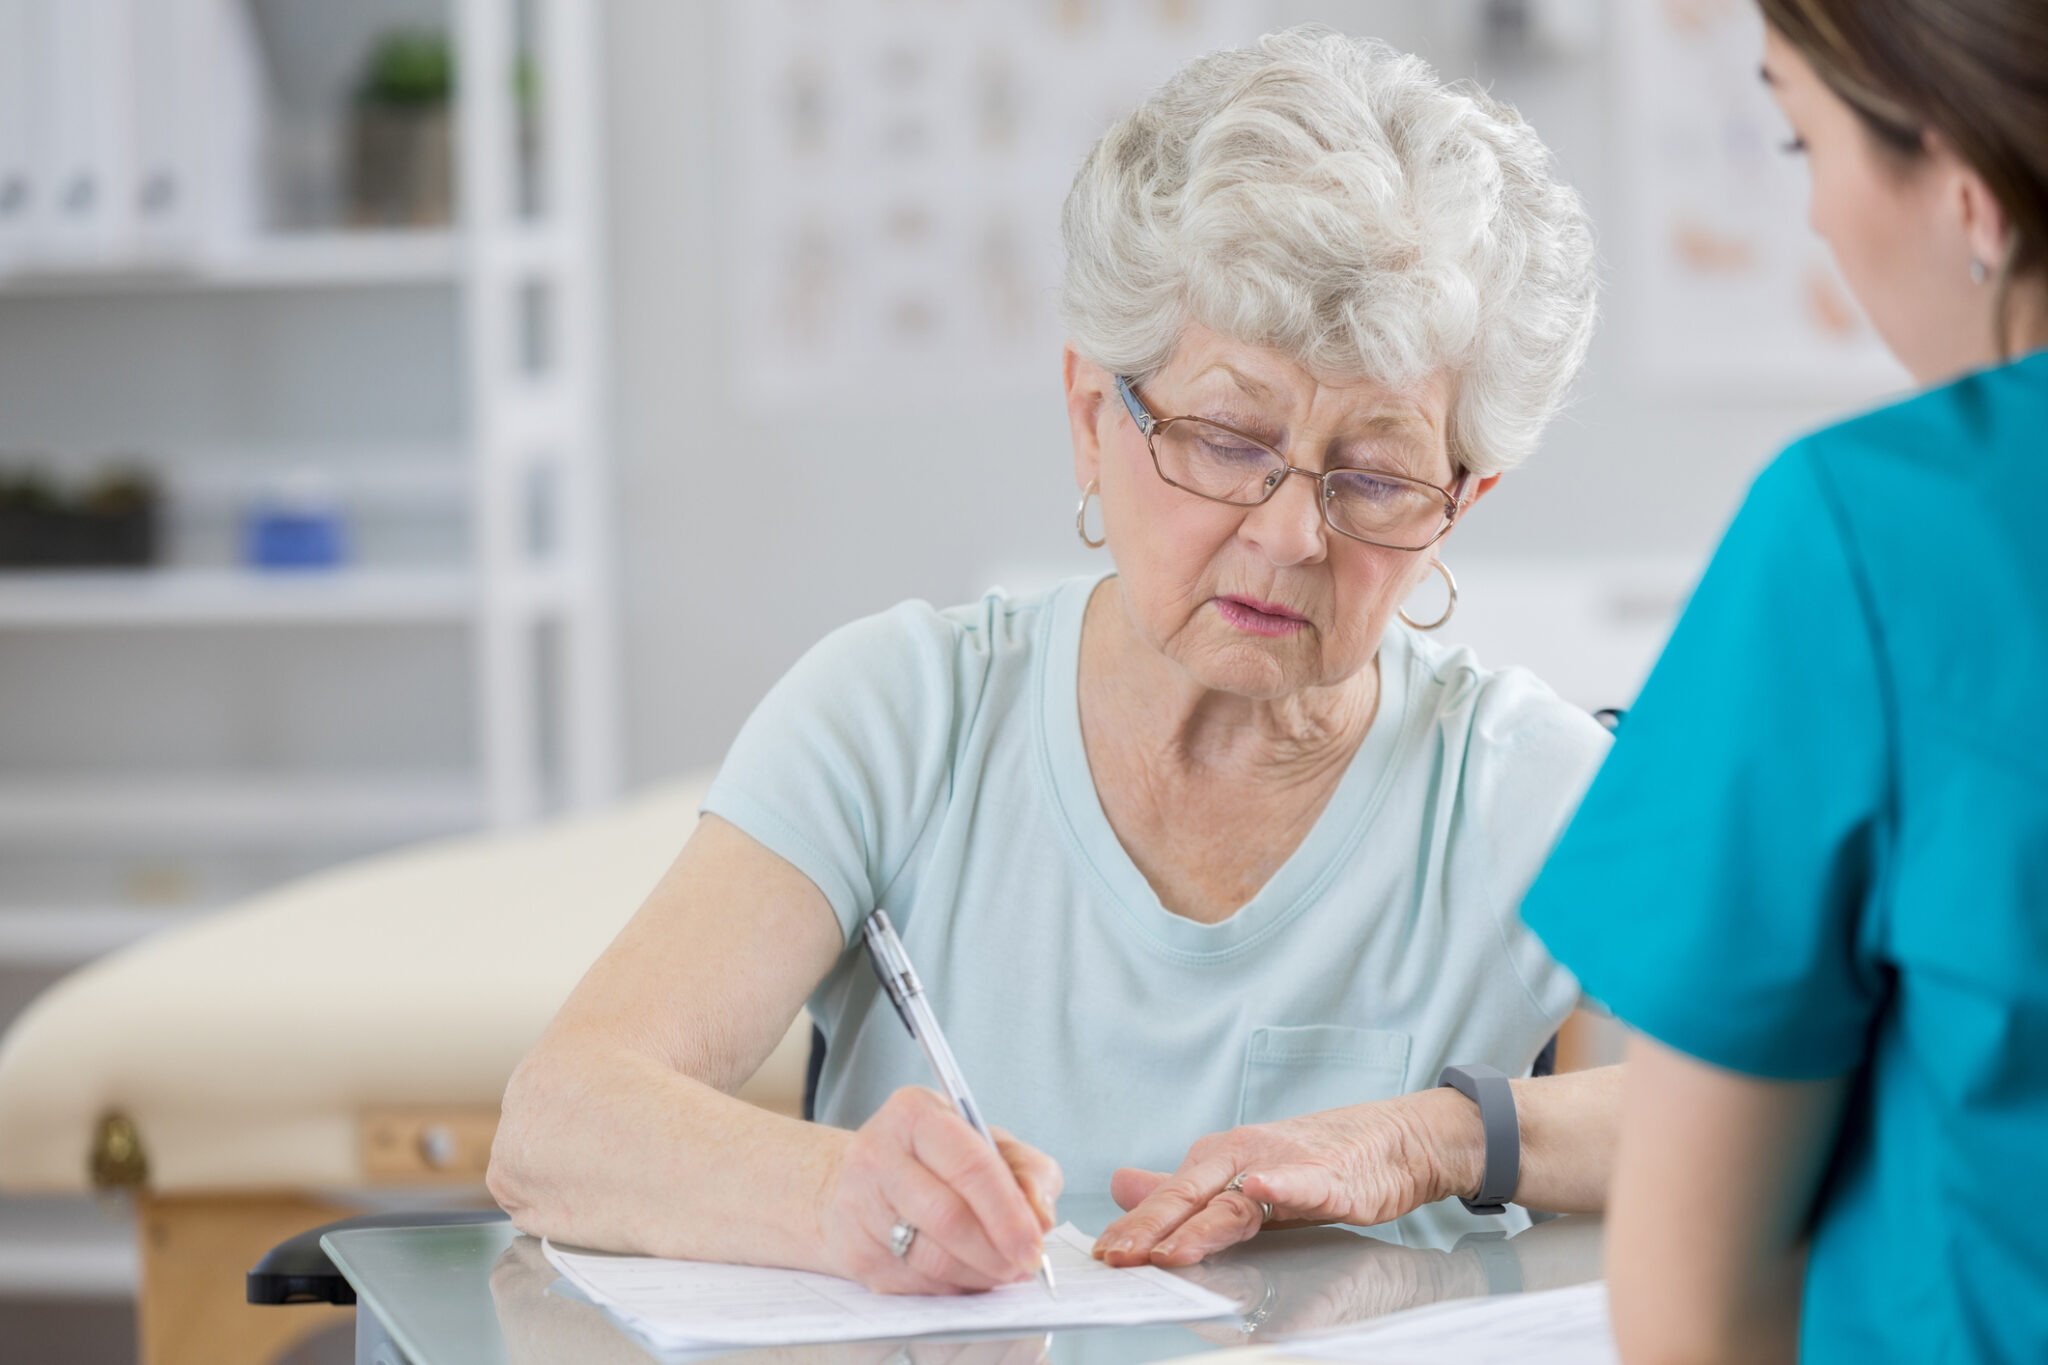 Senior woman concentrates as she completes insurance paperwork. A healthcare professional is helping her with the paperwork.